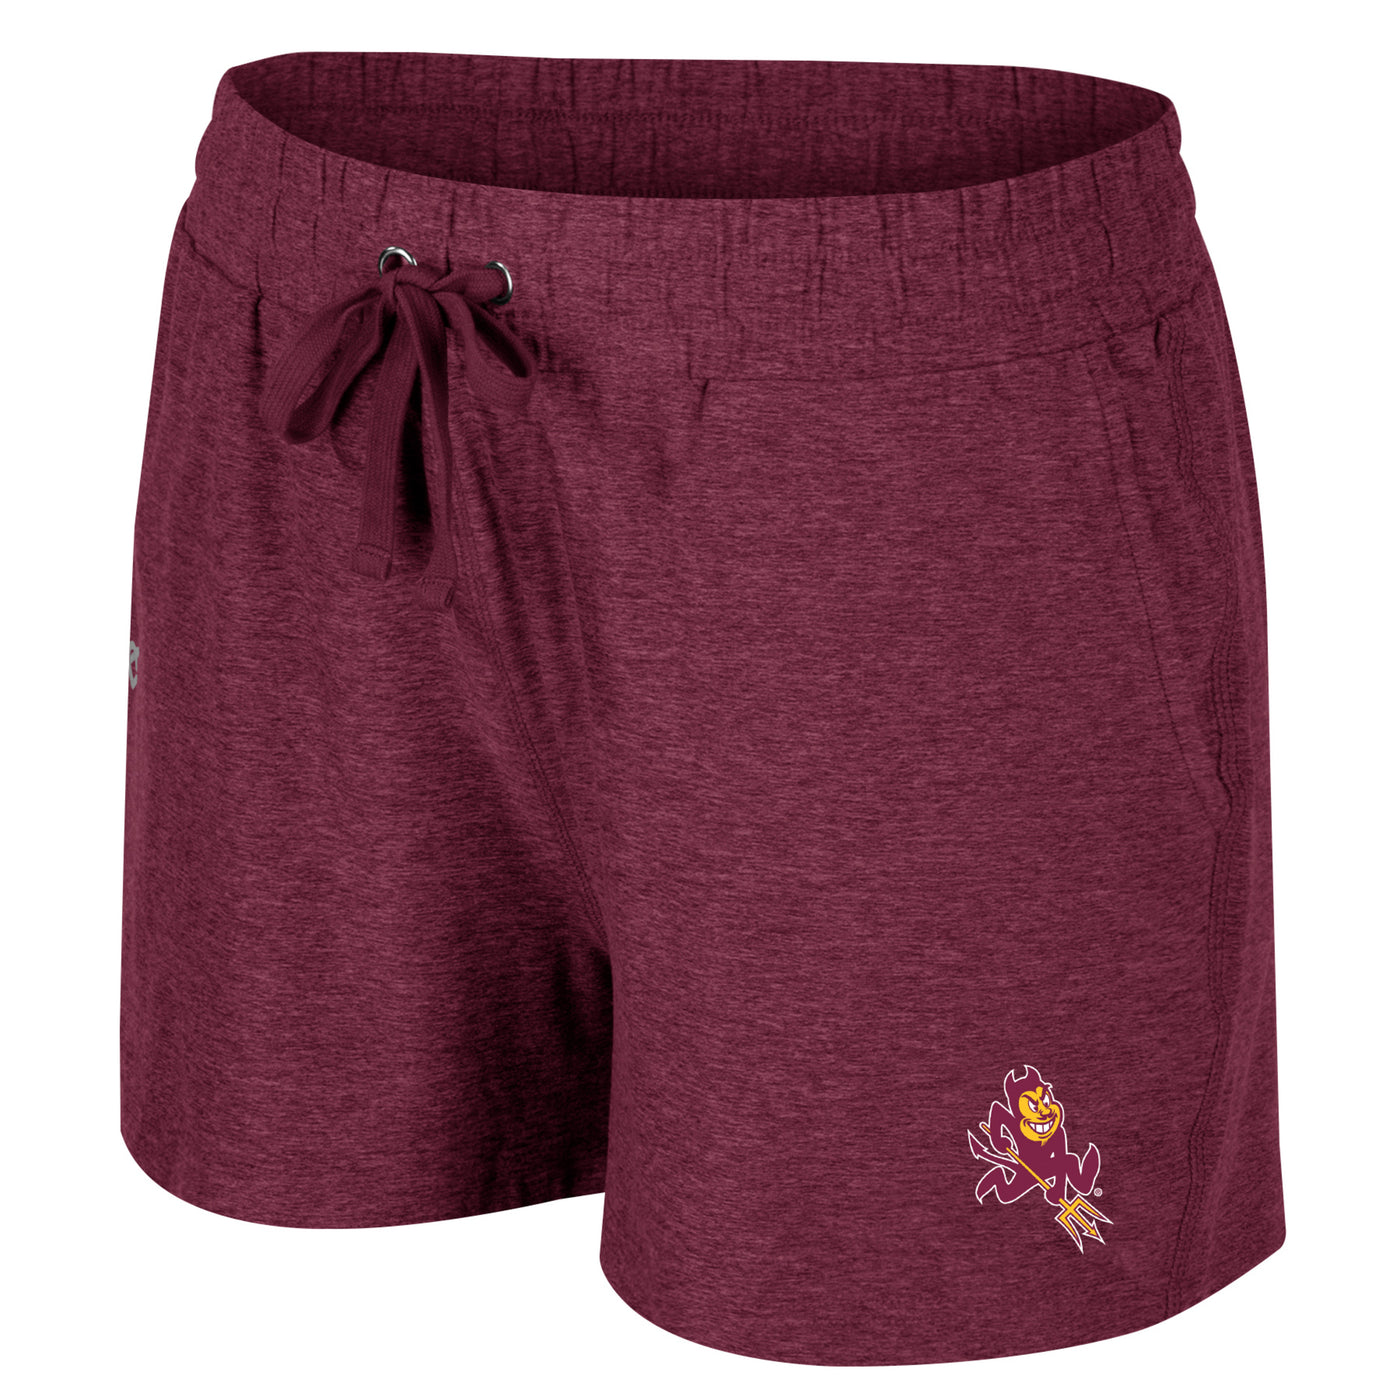 ASU maroon womens shorts with a small sparky mascot on the bottom.